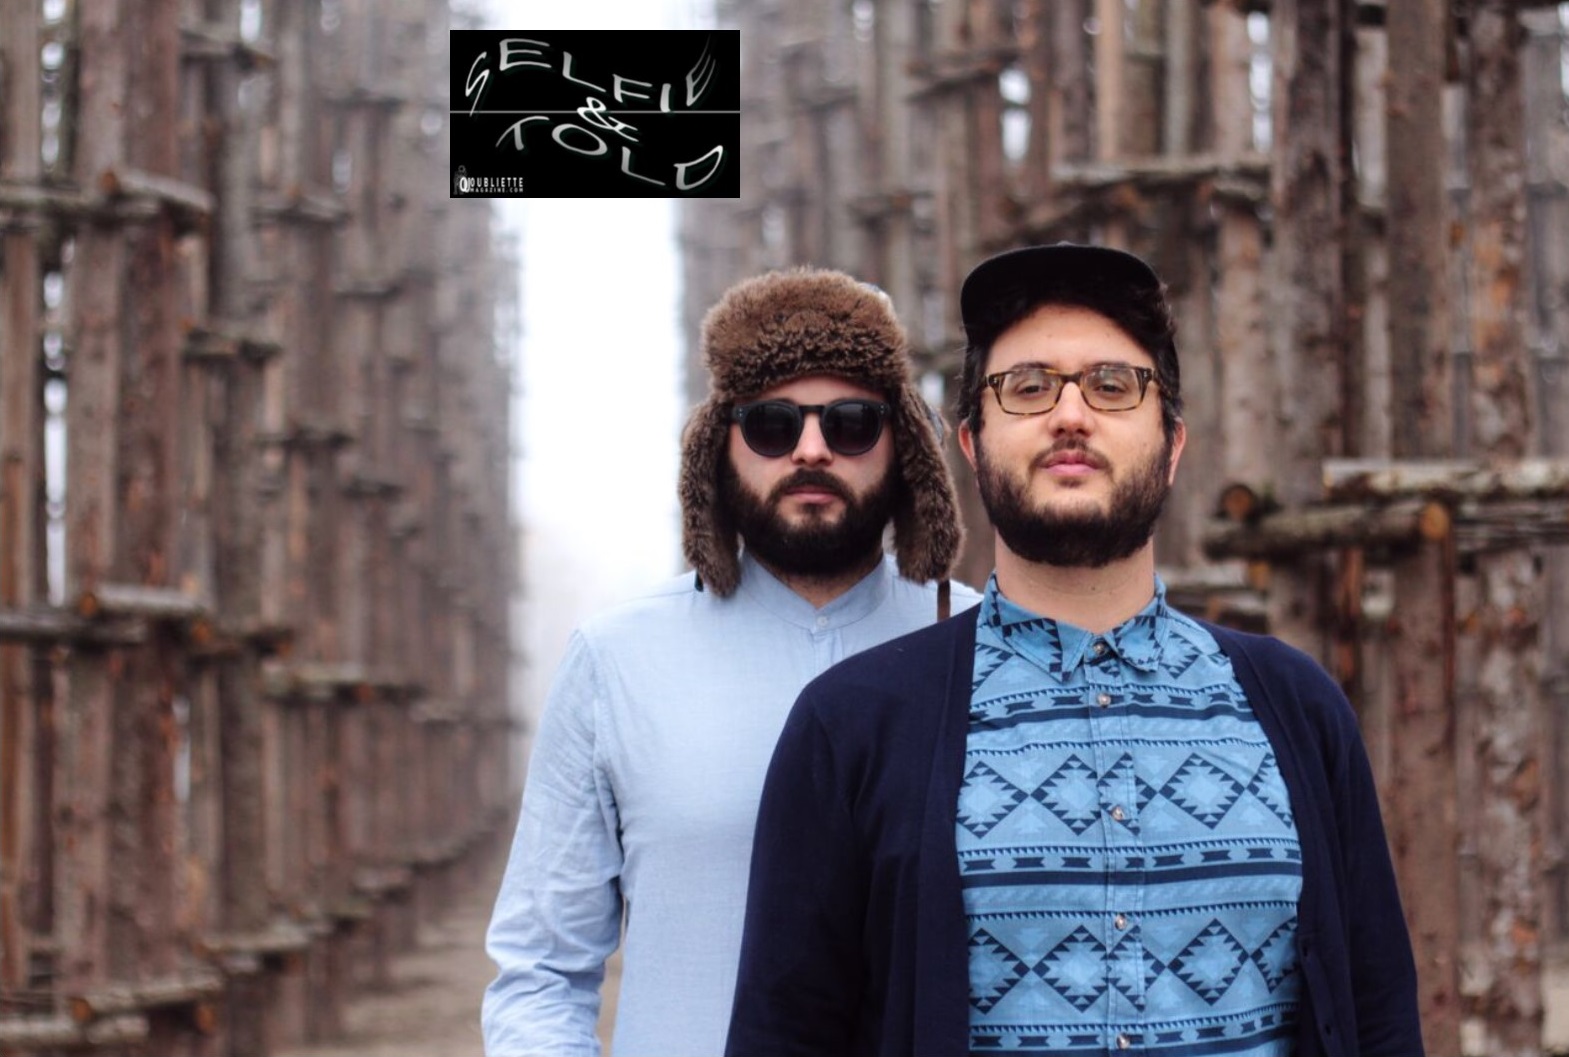 Selfie & Told: il duo The Cat and the Fishbowl racconta l’EP “Feels Like Home”